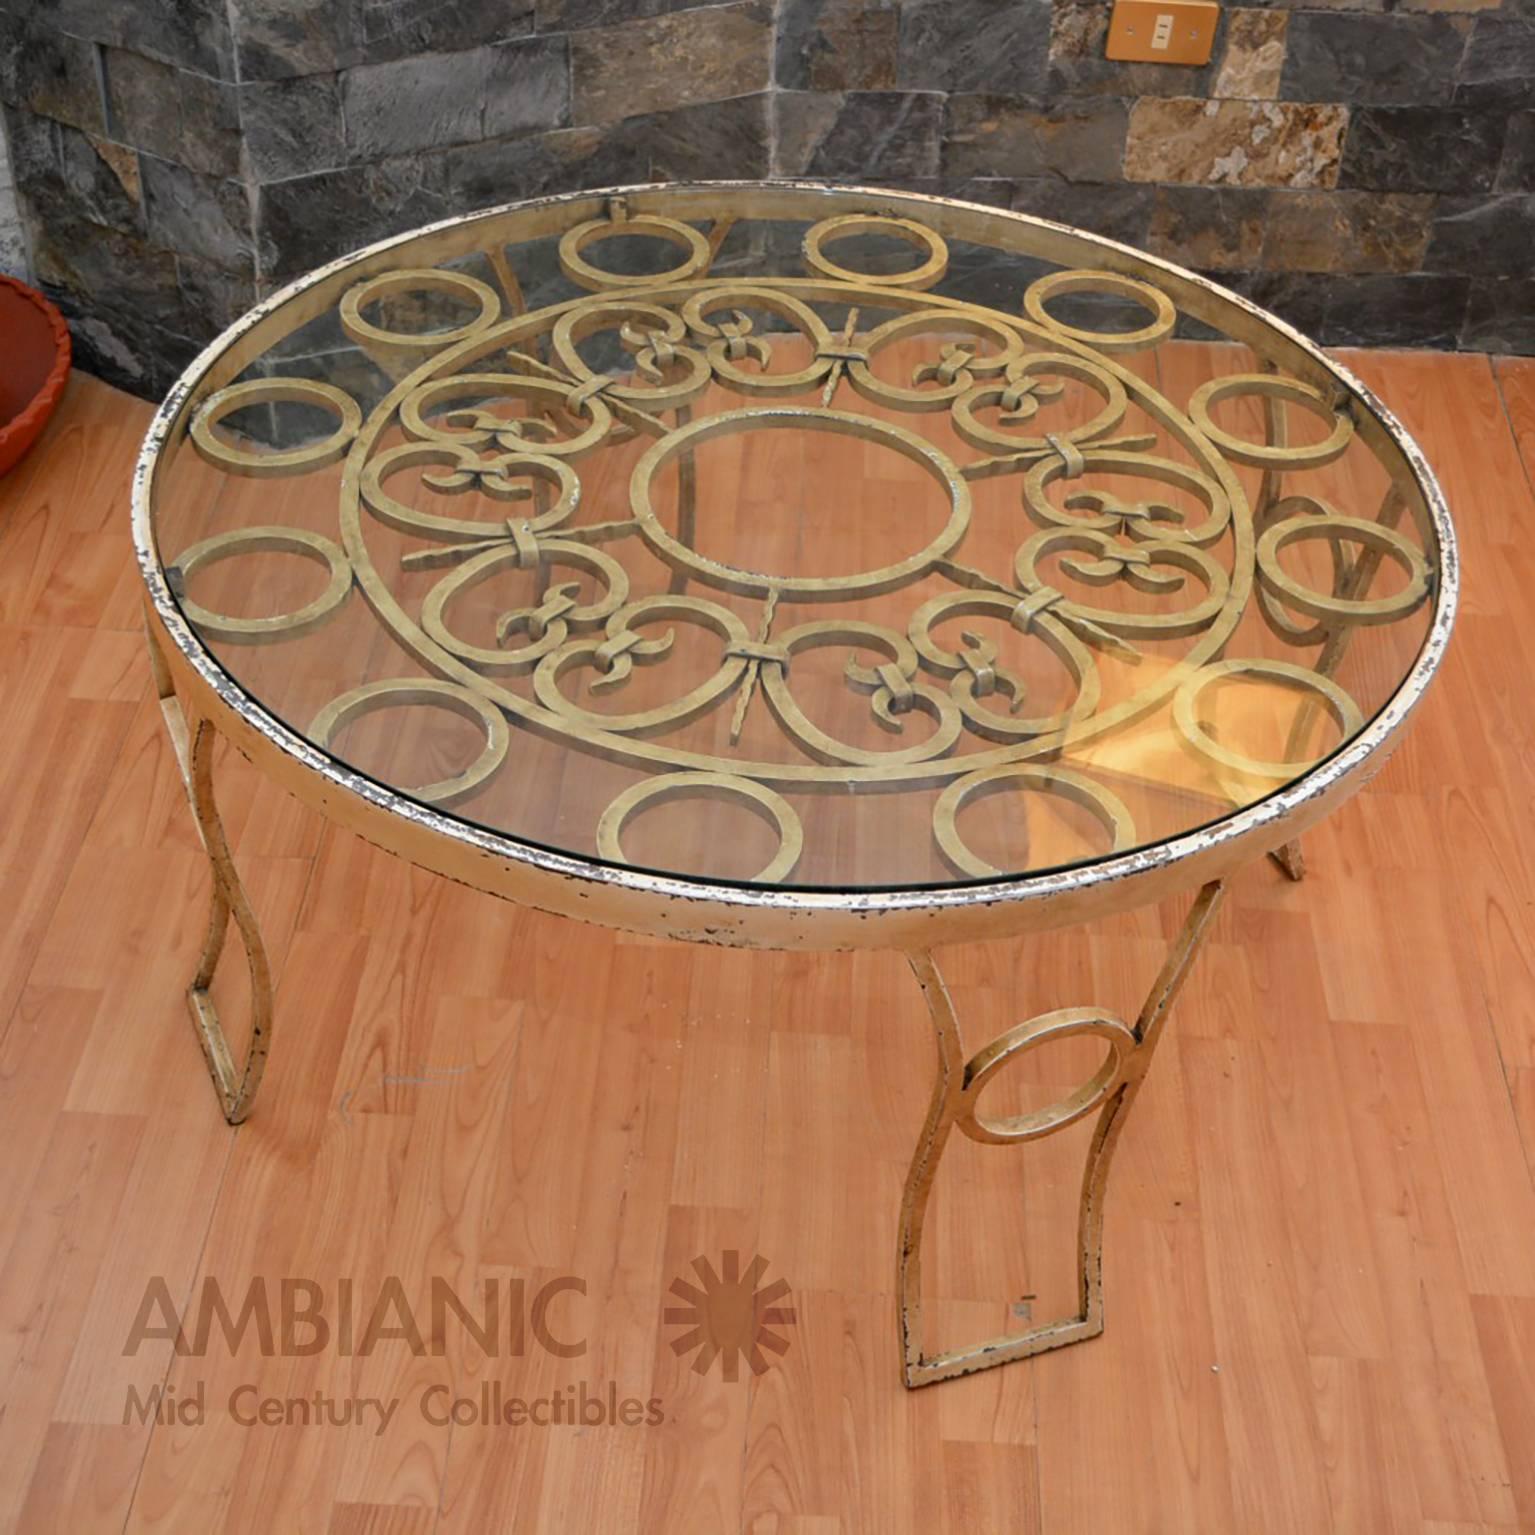 Mid-Century Modern Mid Century Mexican Modernist Talleres Chacón Round Coffee Table, Forged Iron